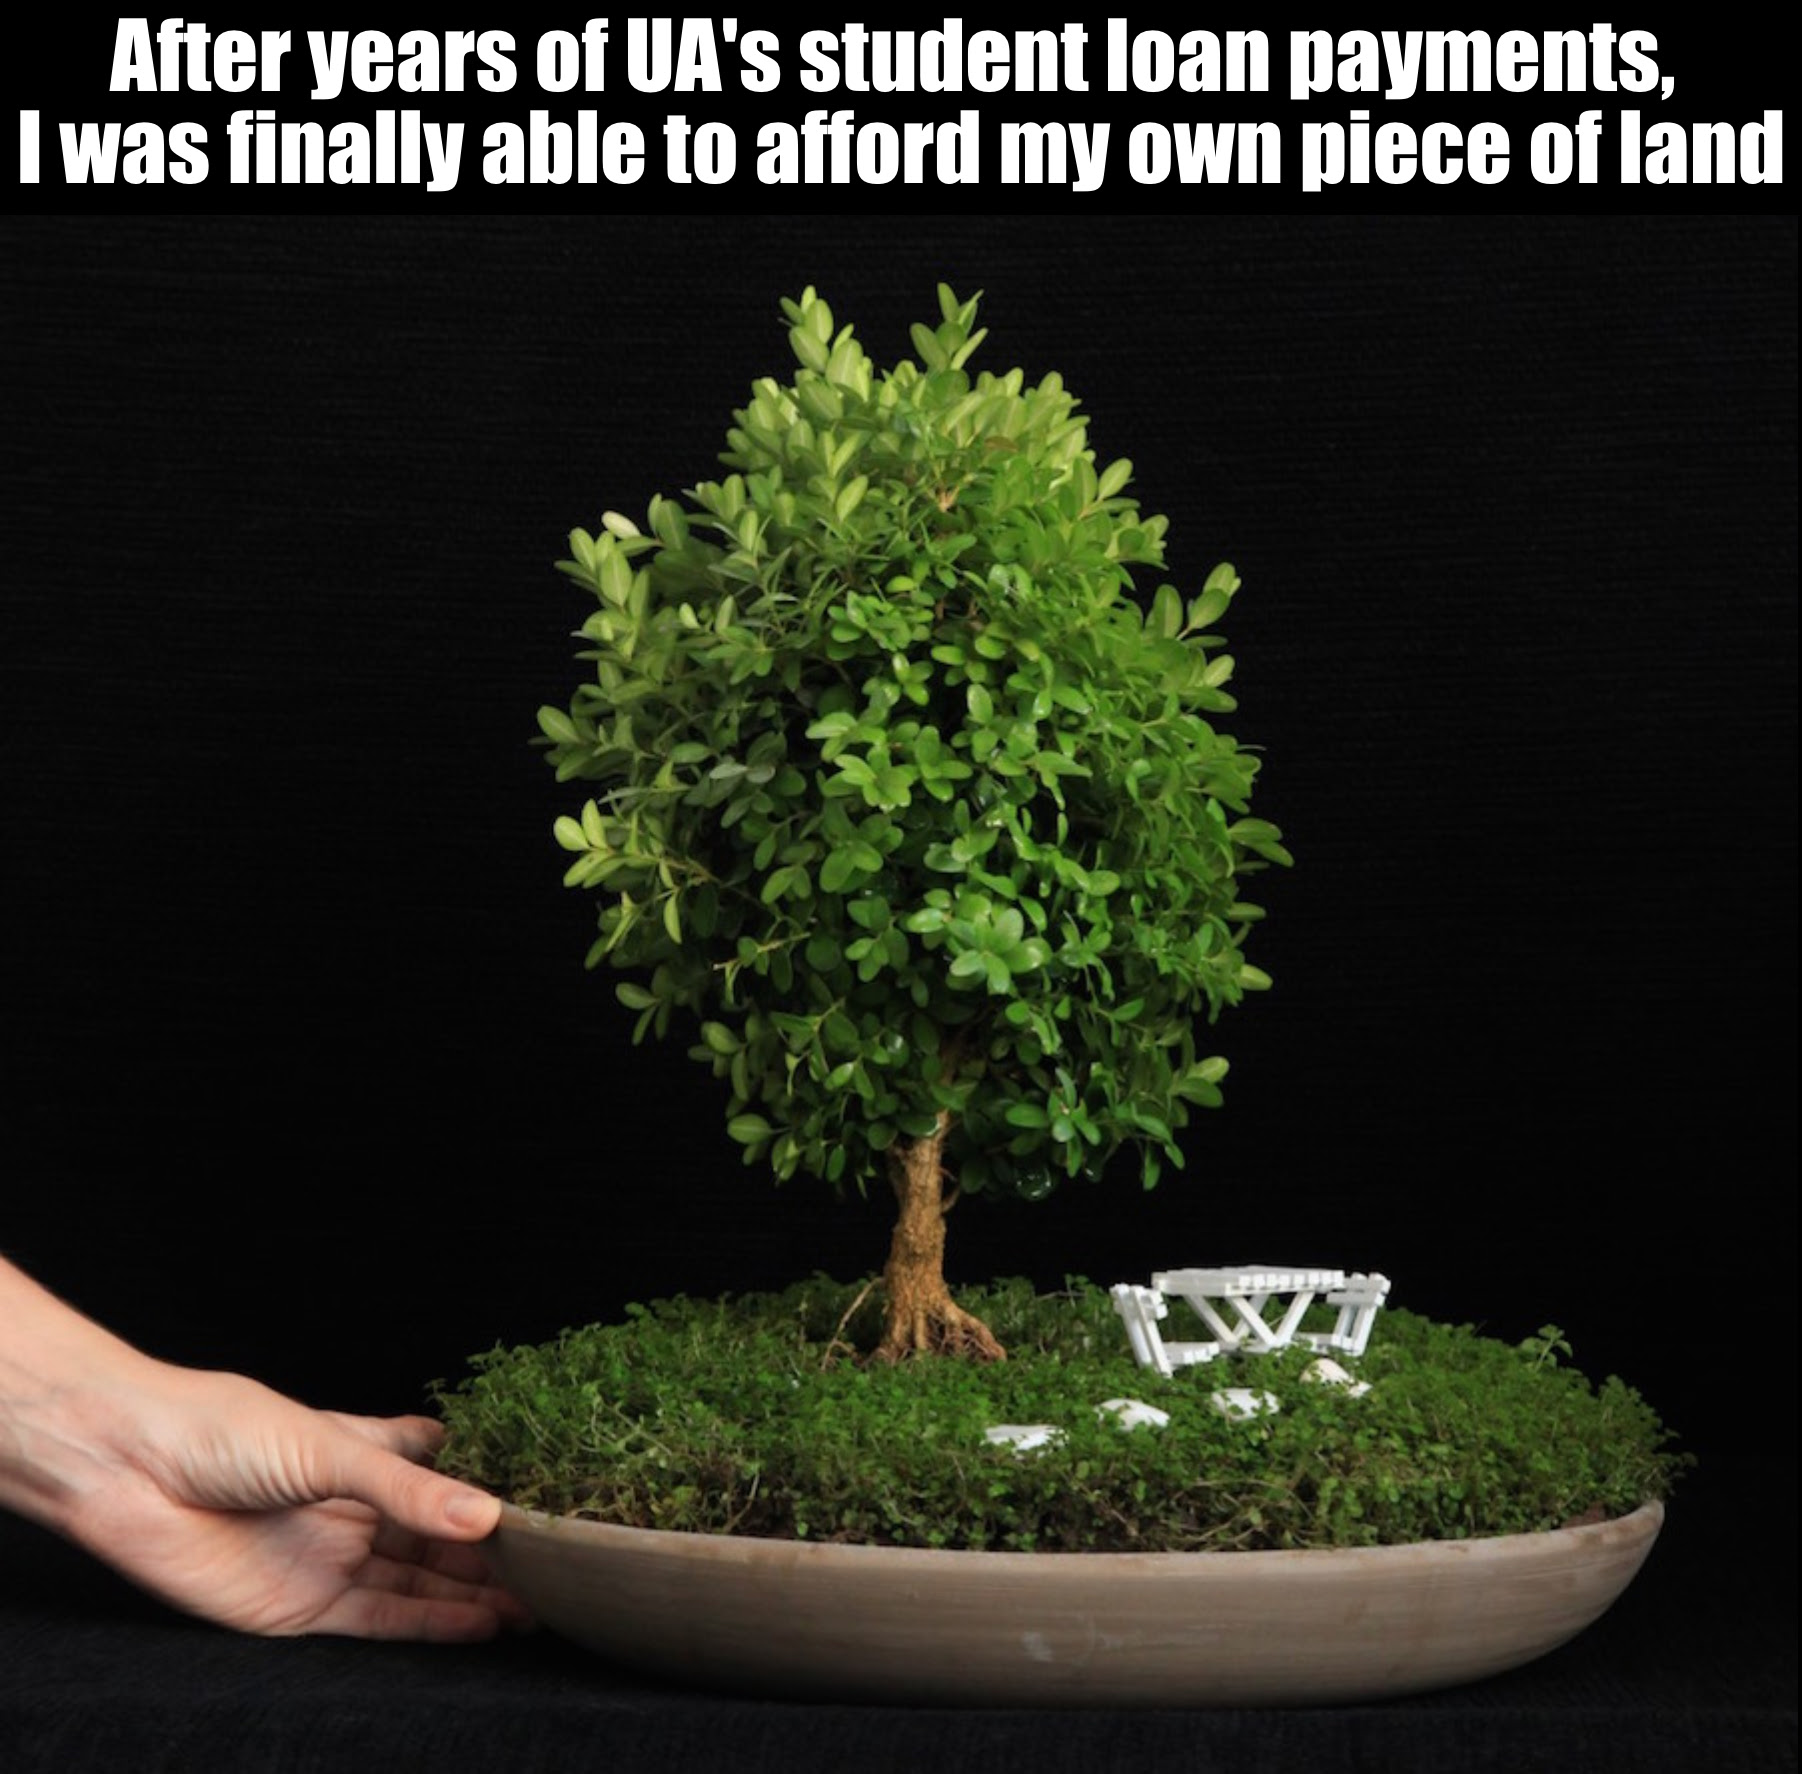 Image of a tree with the message "after years of UA's student loan payments, I was finally able to afford my own piece of land"